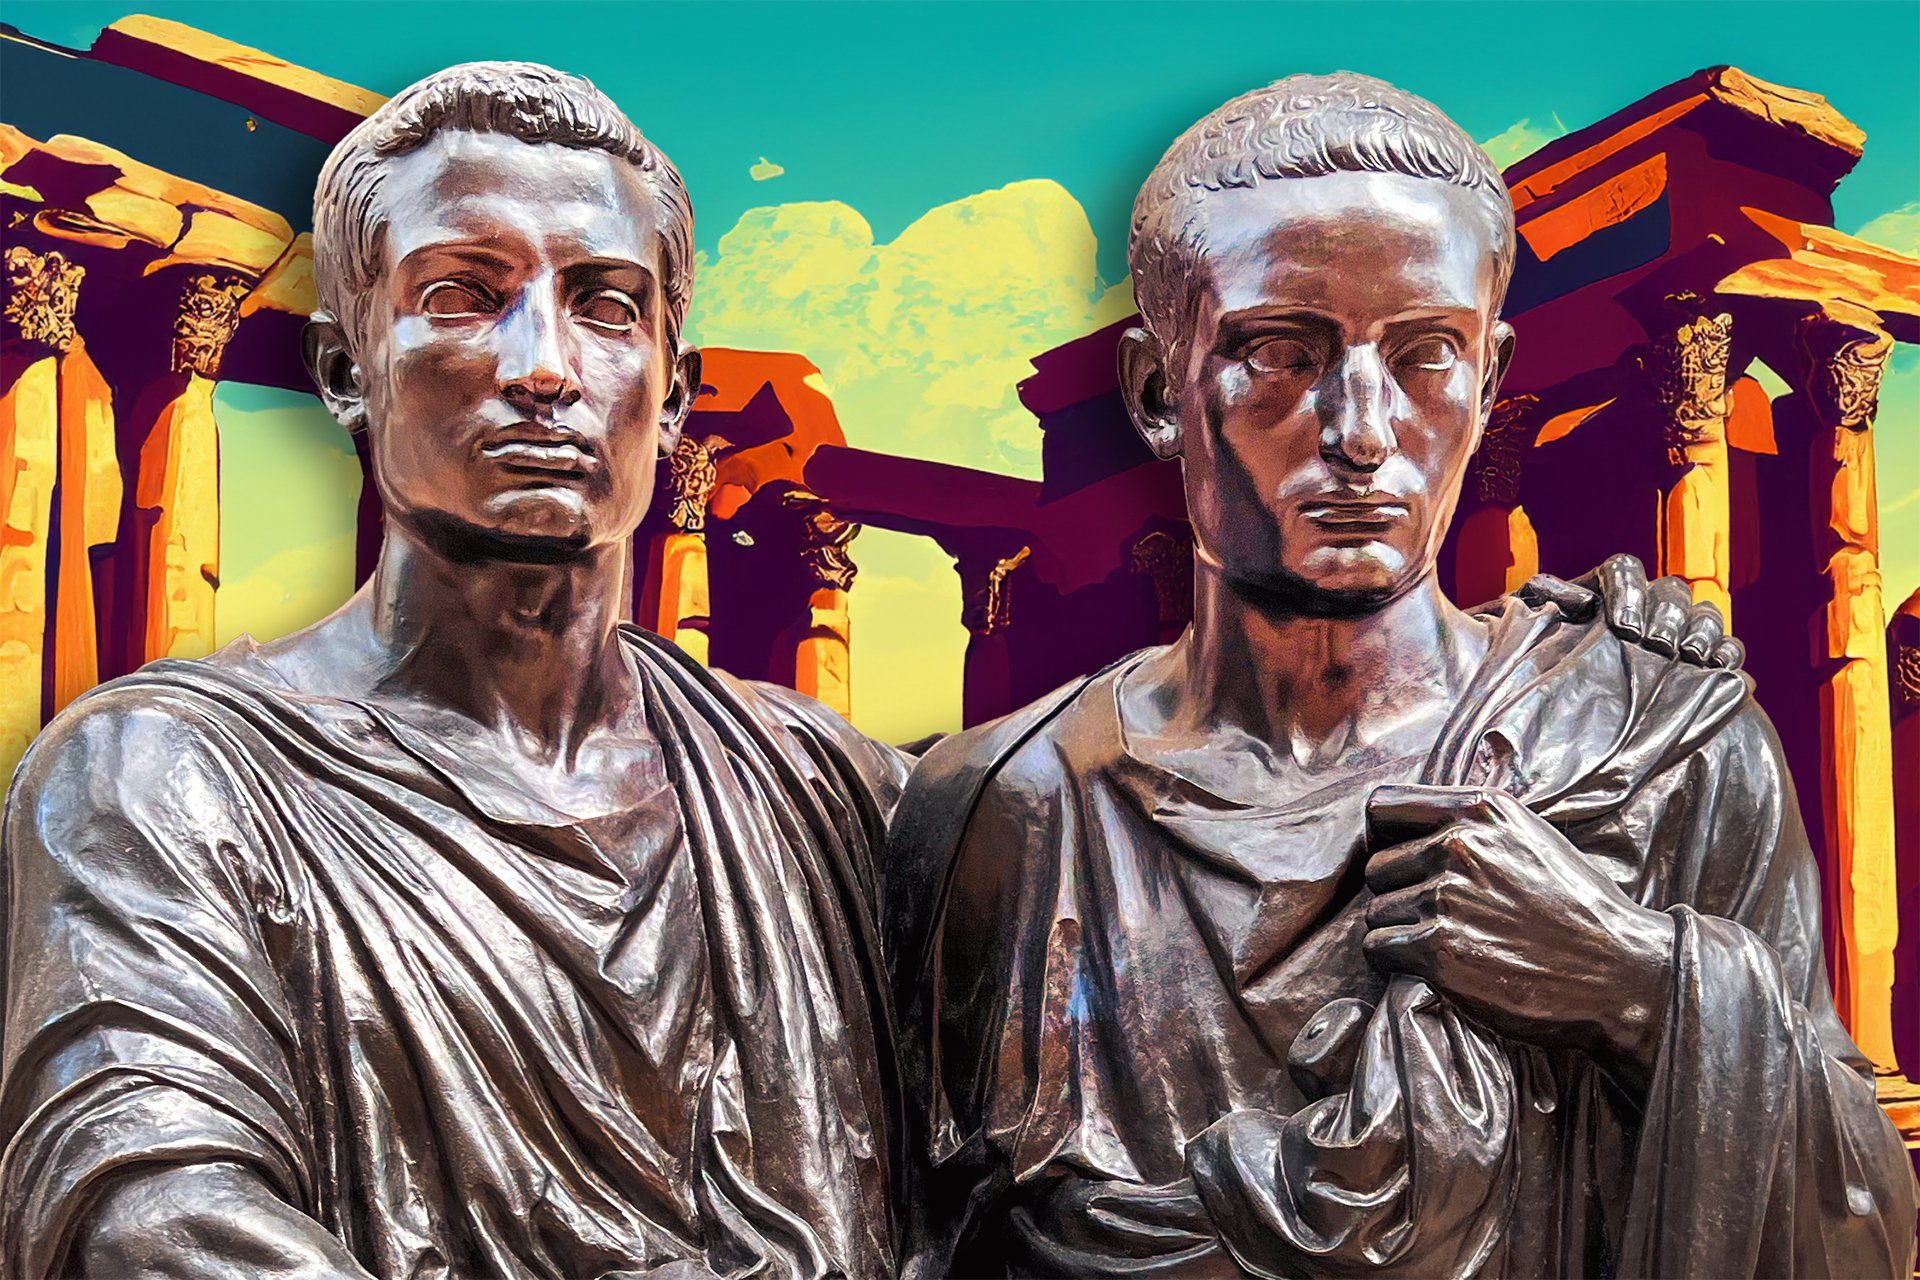 Two metallic statues of Gaius and Tiberius Gracchus brothers in togas in front of a Roman temple with colorful columns and a blue sky.